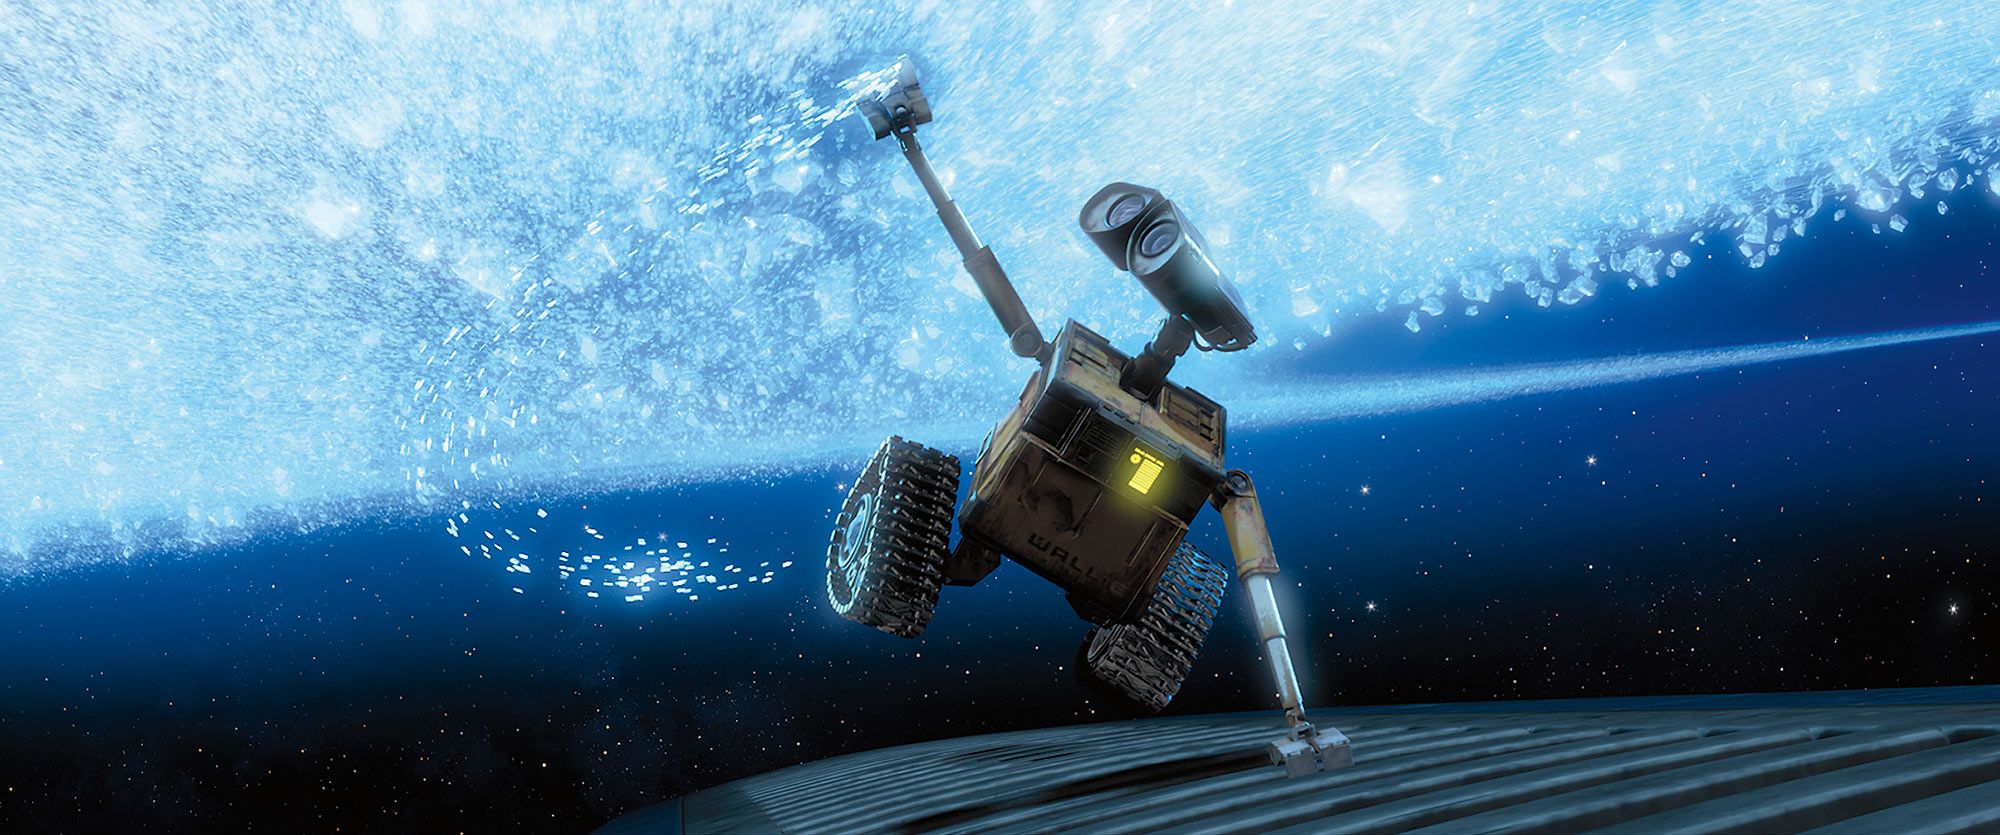 WallE Picture